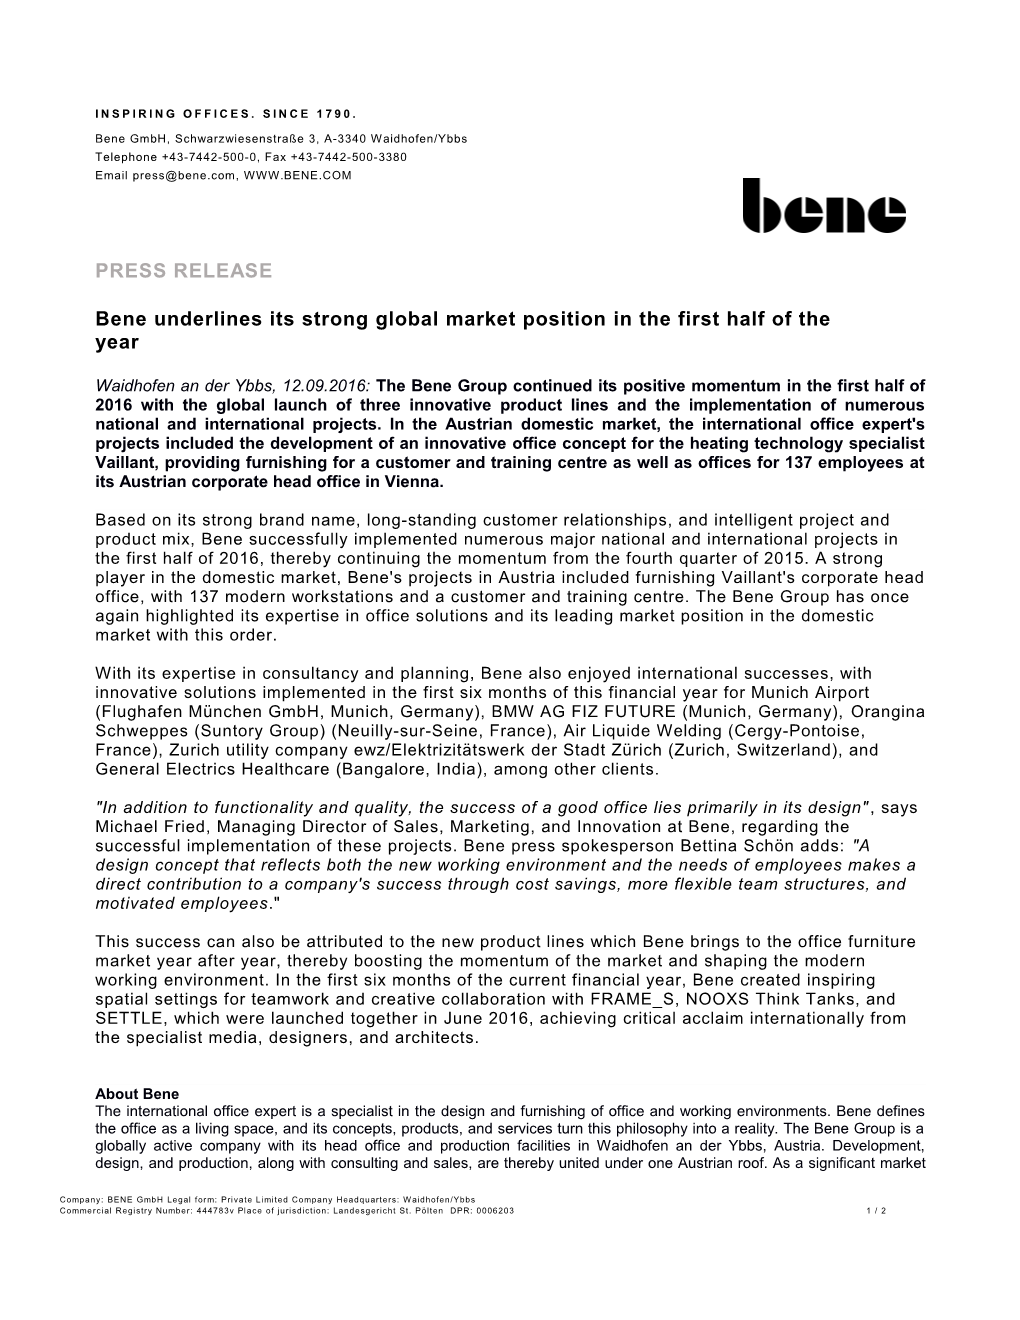 Bene Underlines Its Strong Global Market Position in the First Half of the Year